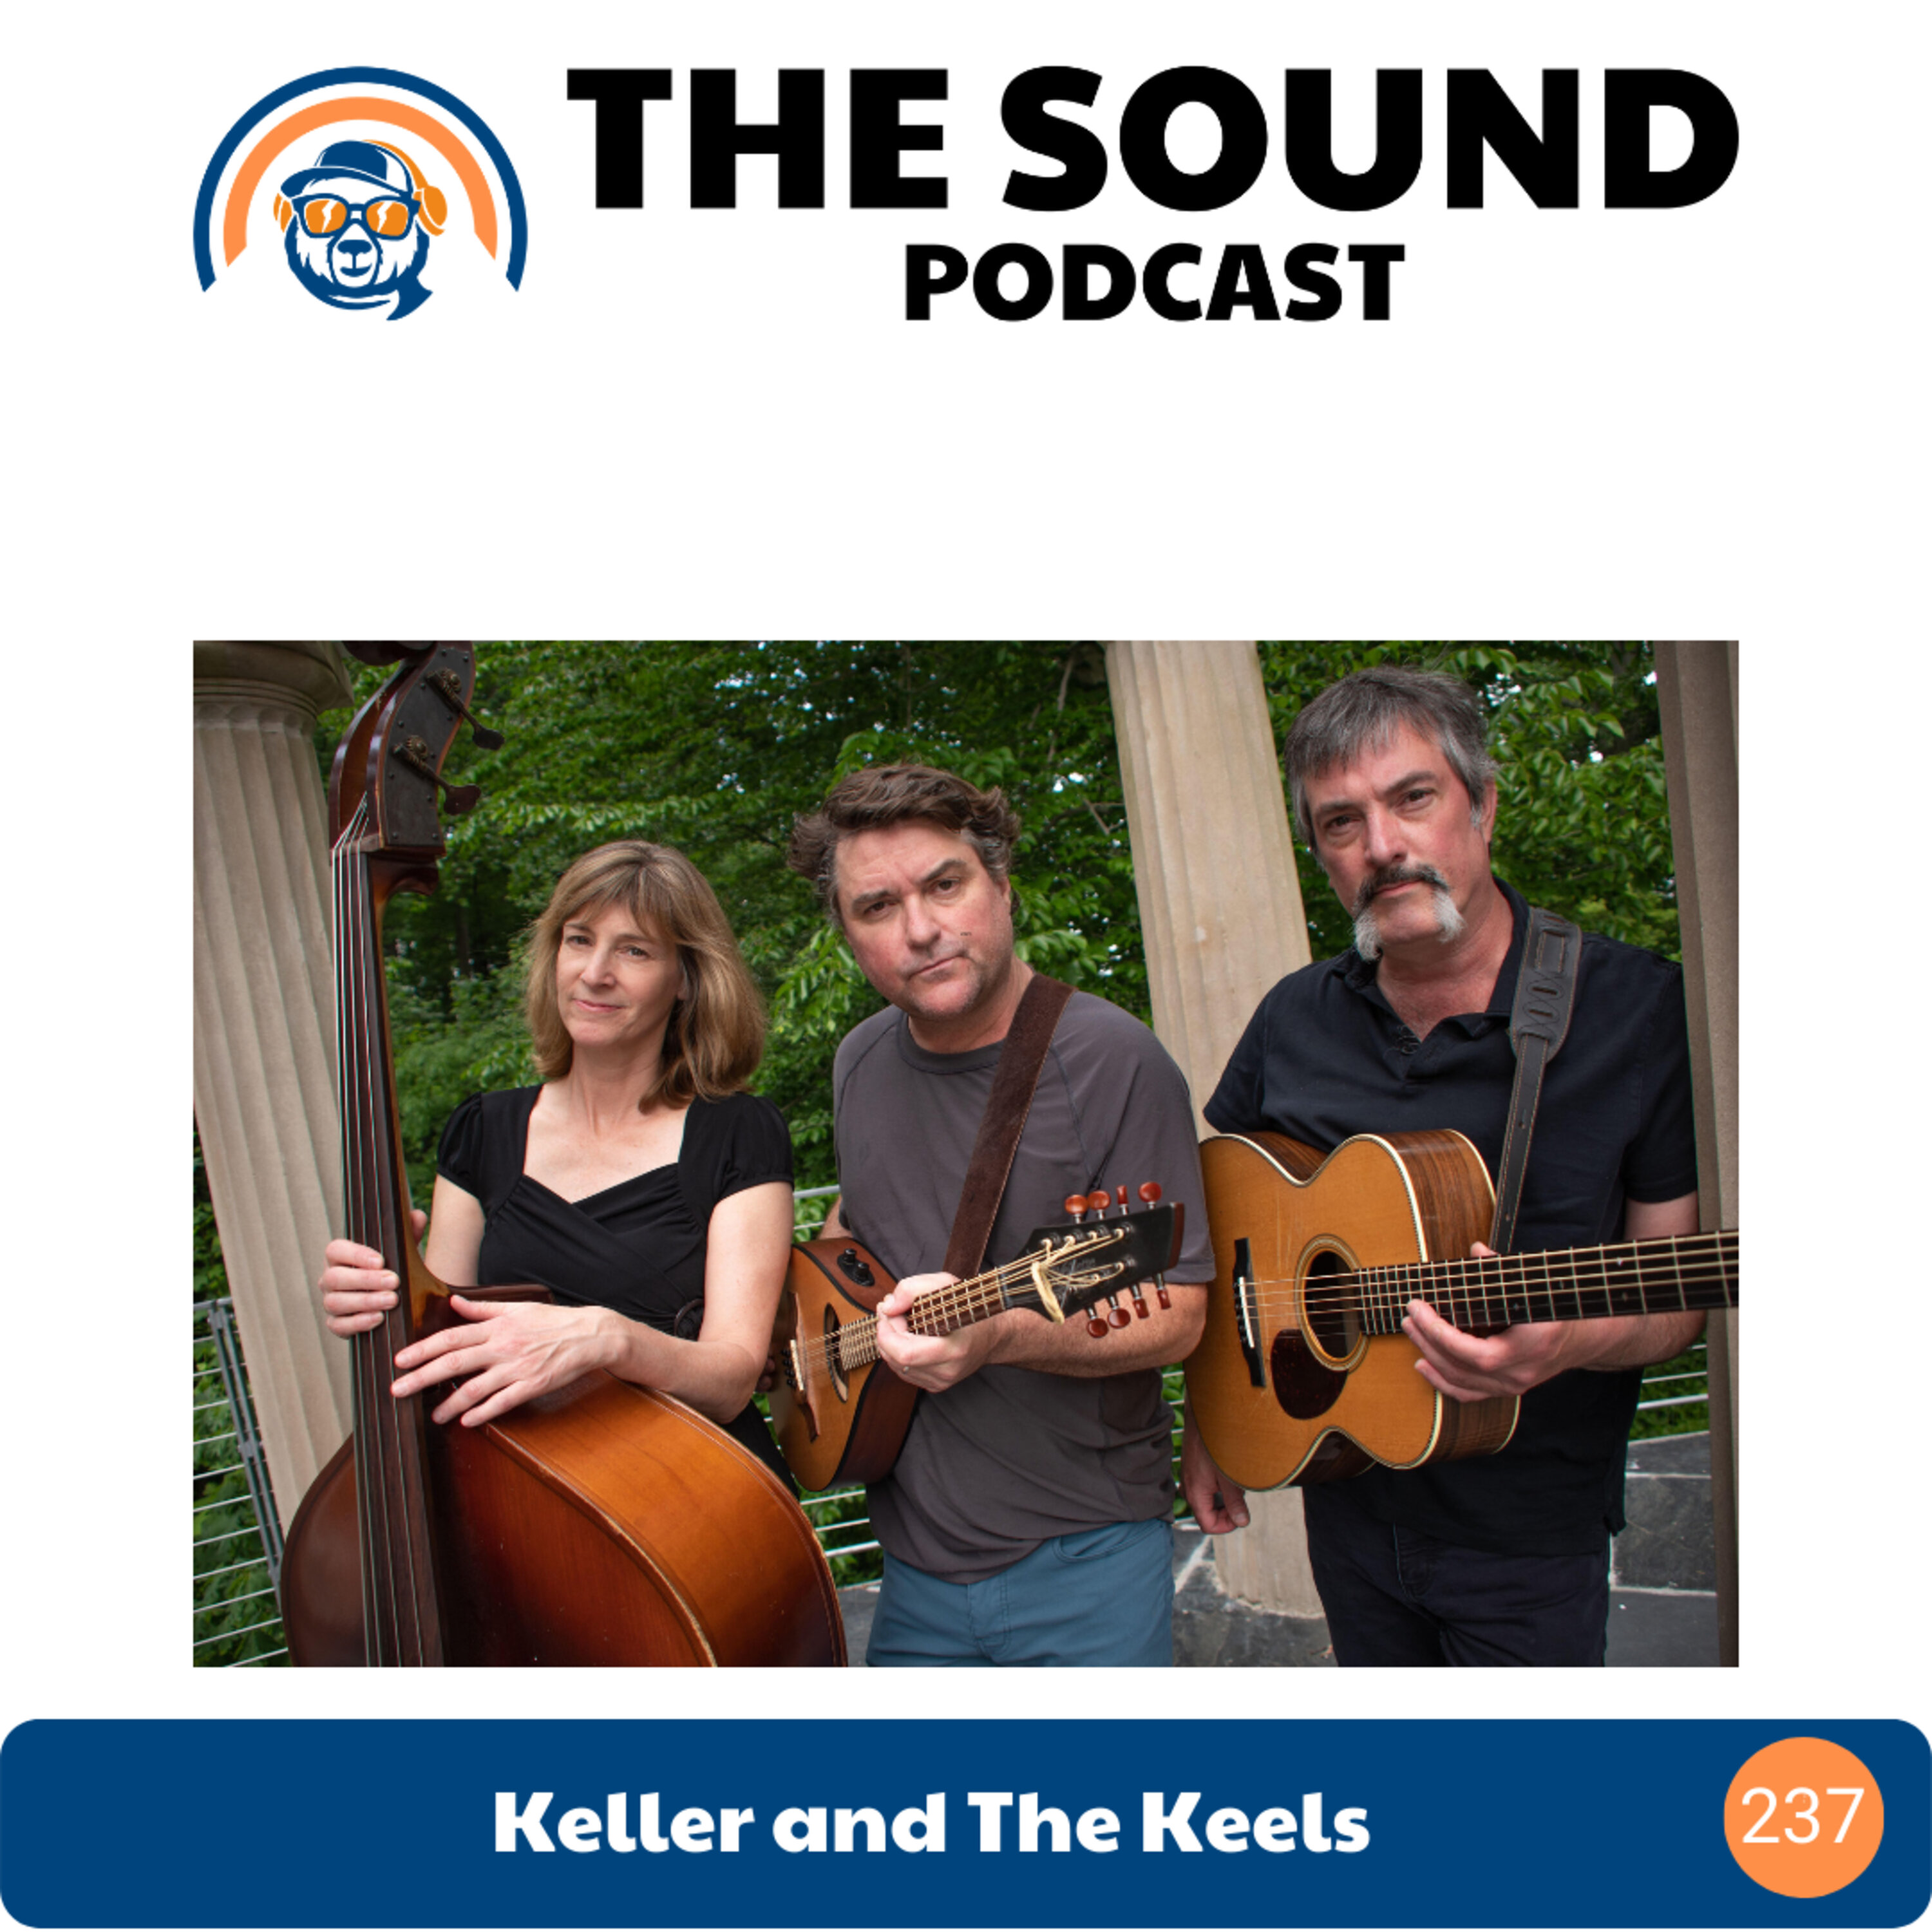 Keller and The Keels